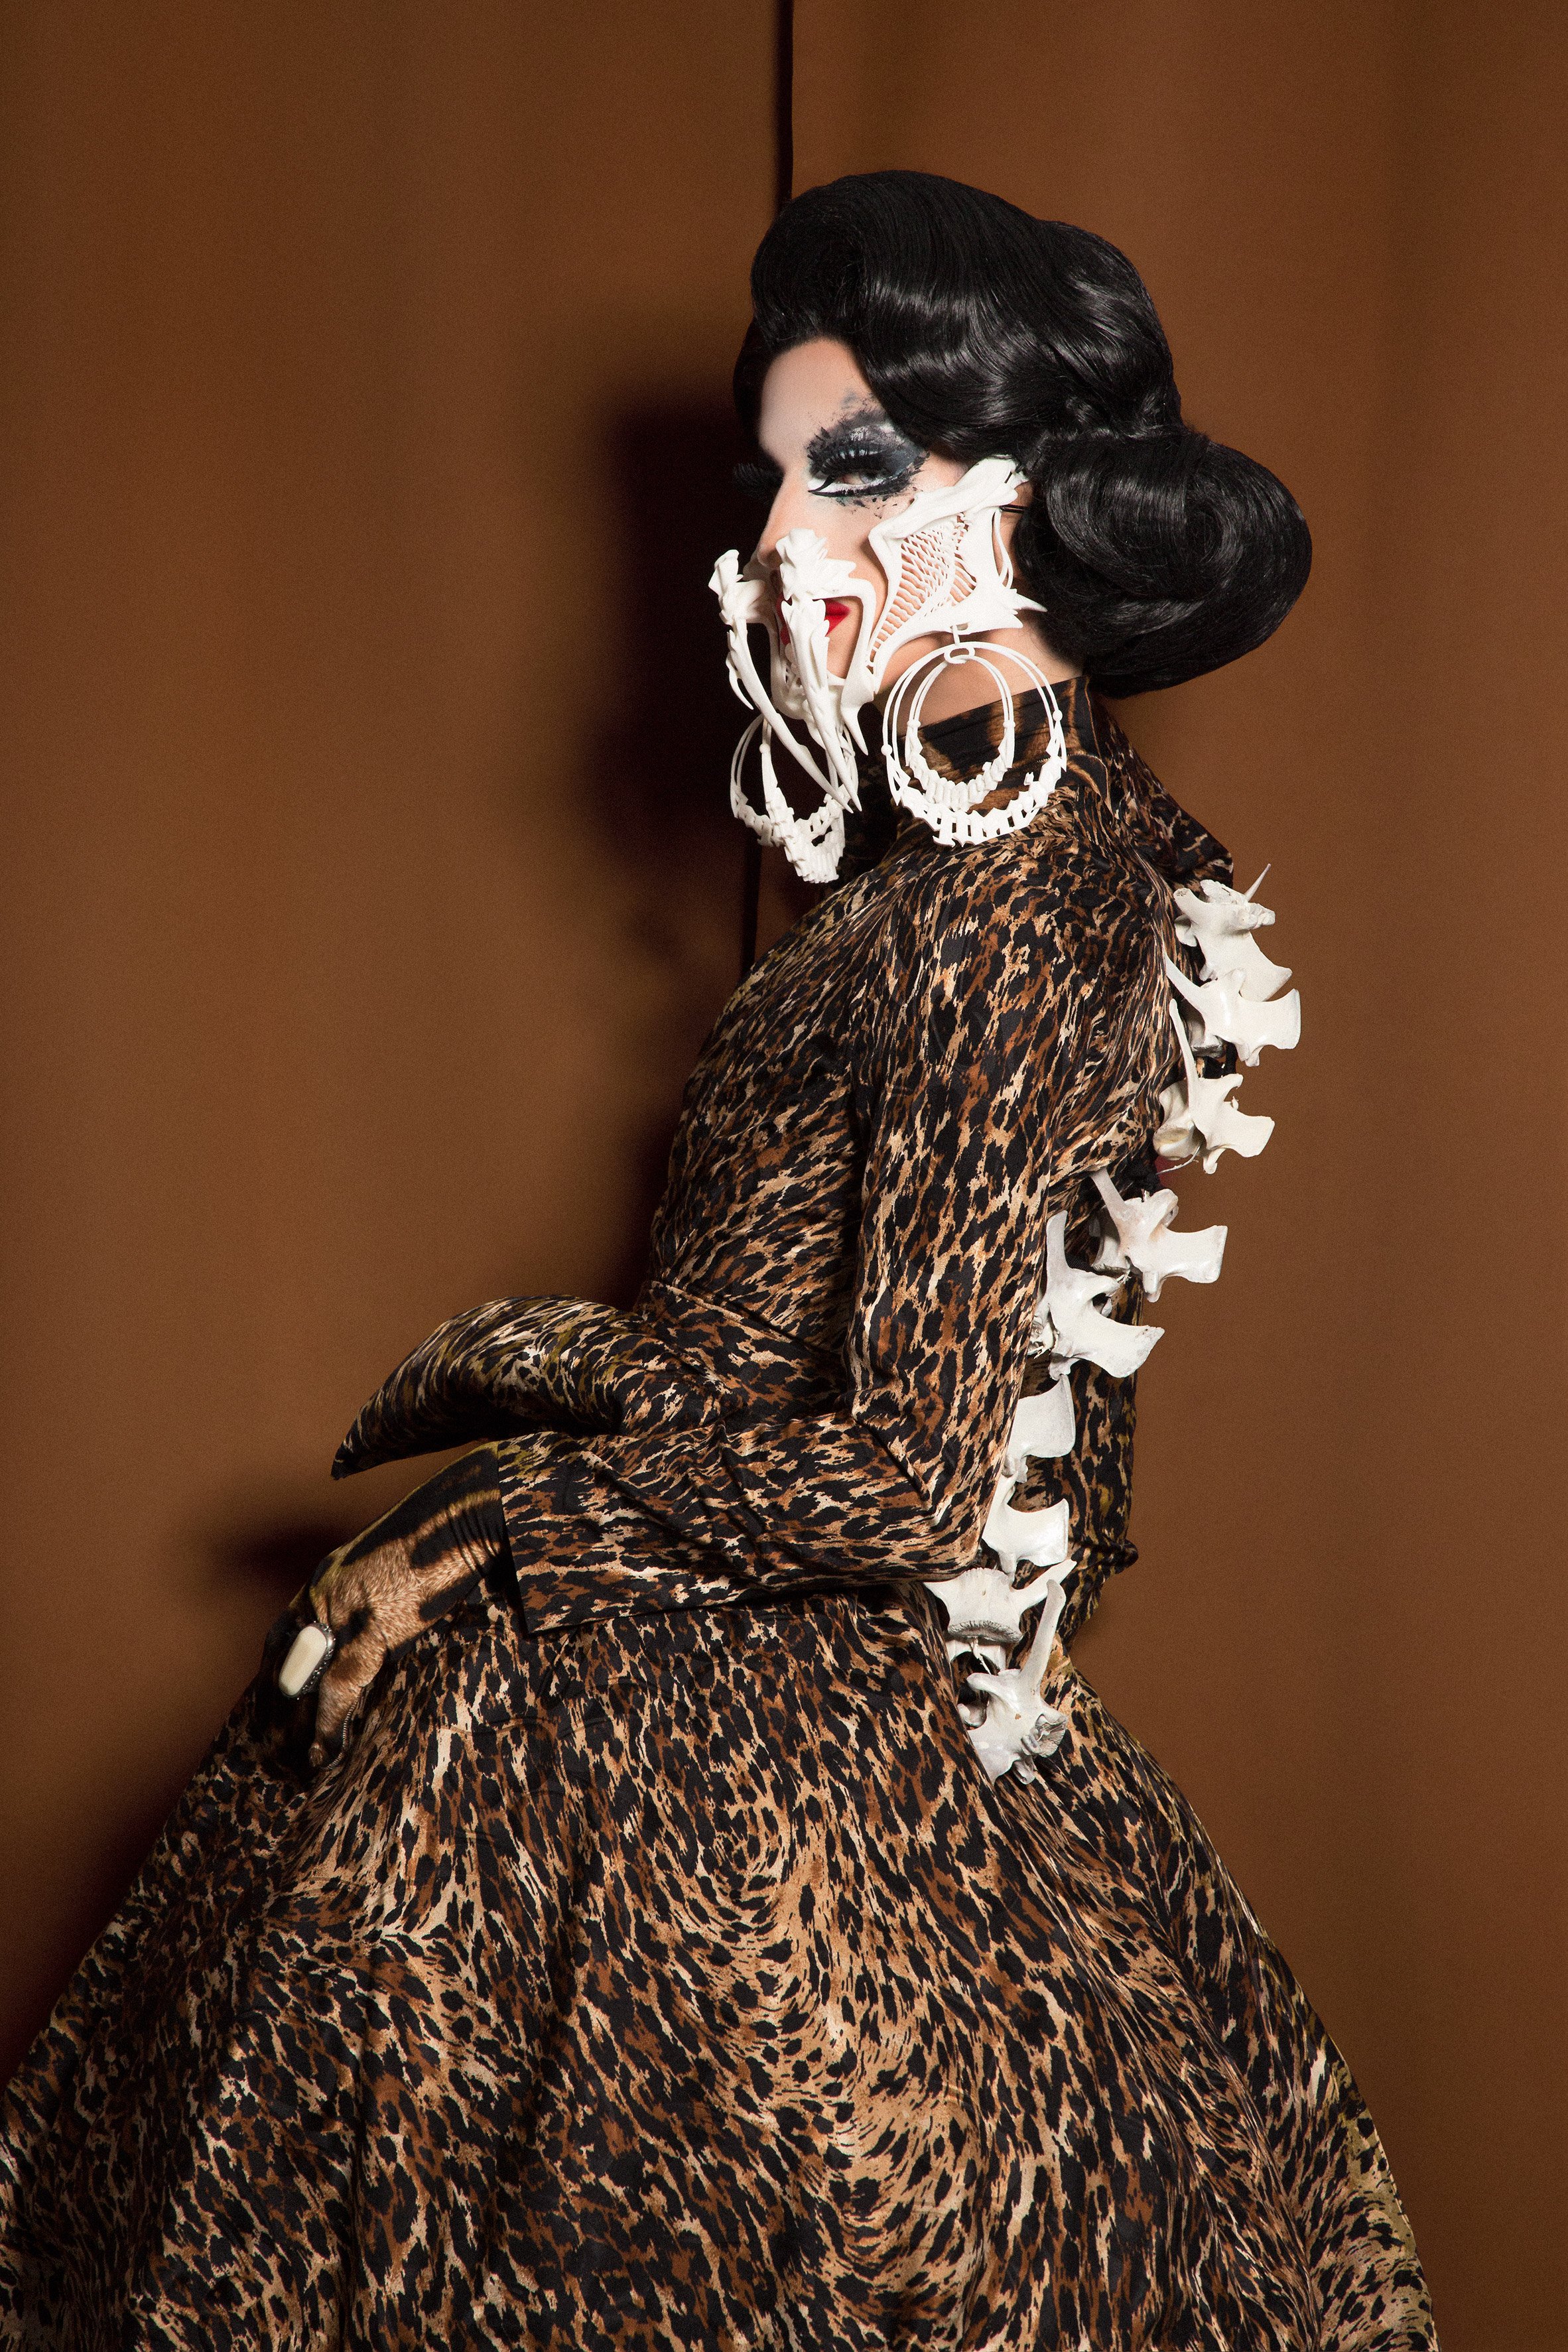 3D printed mask at Rupaul's Drag Race by Kevin Freitas Conlin